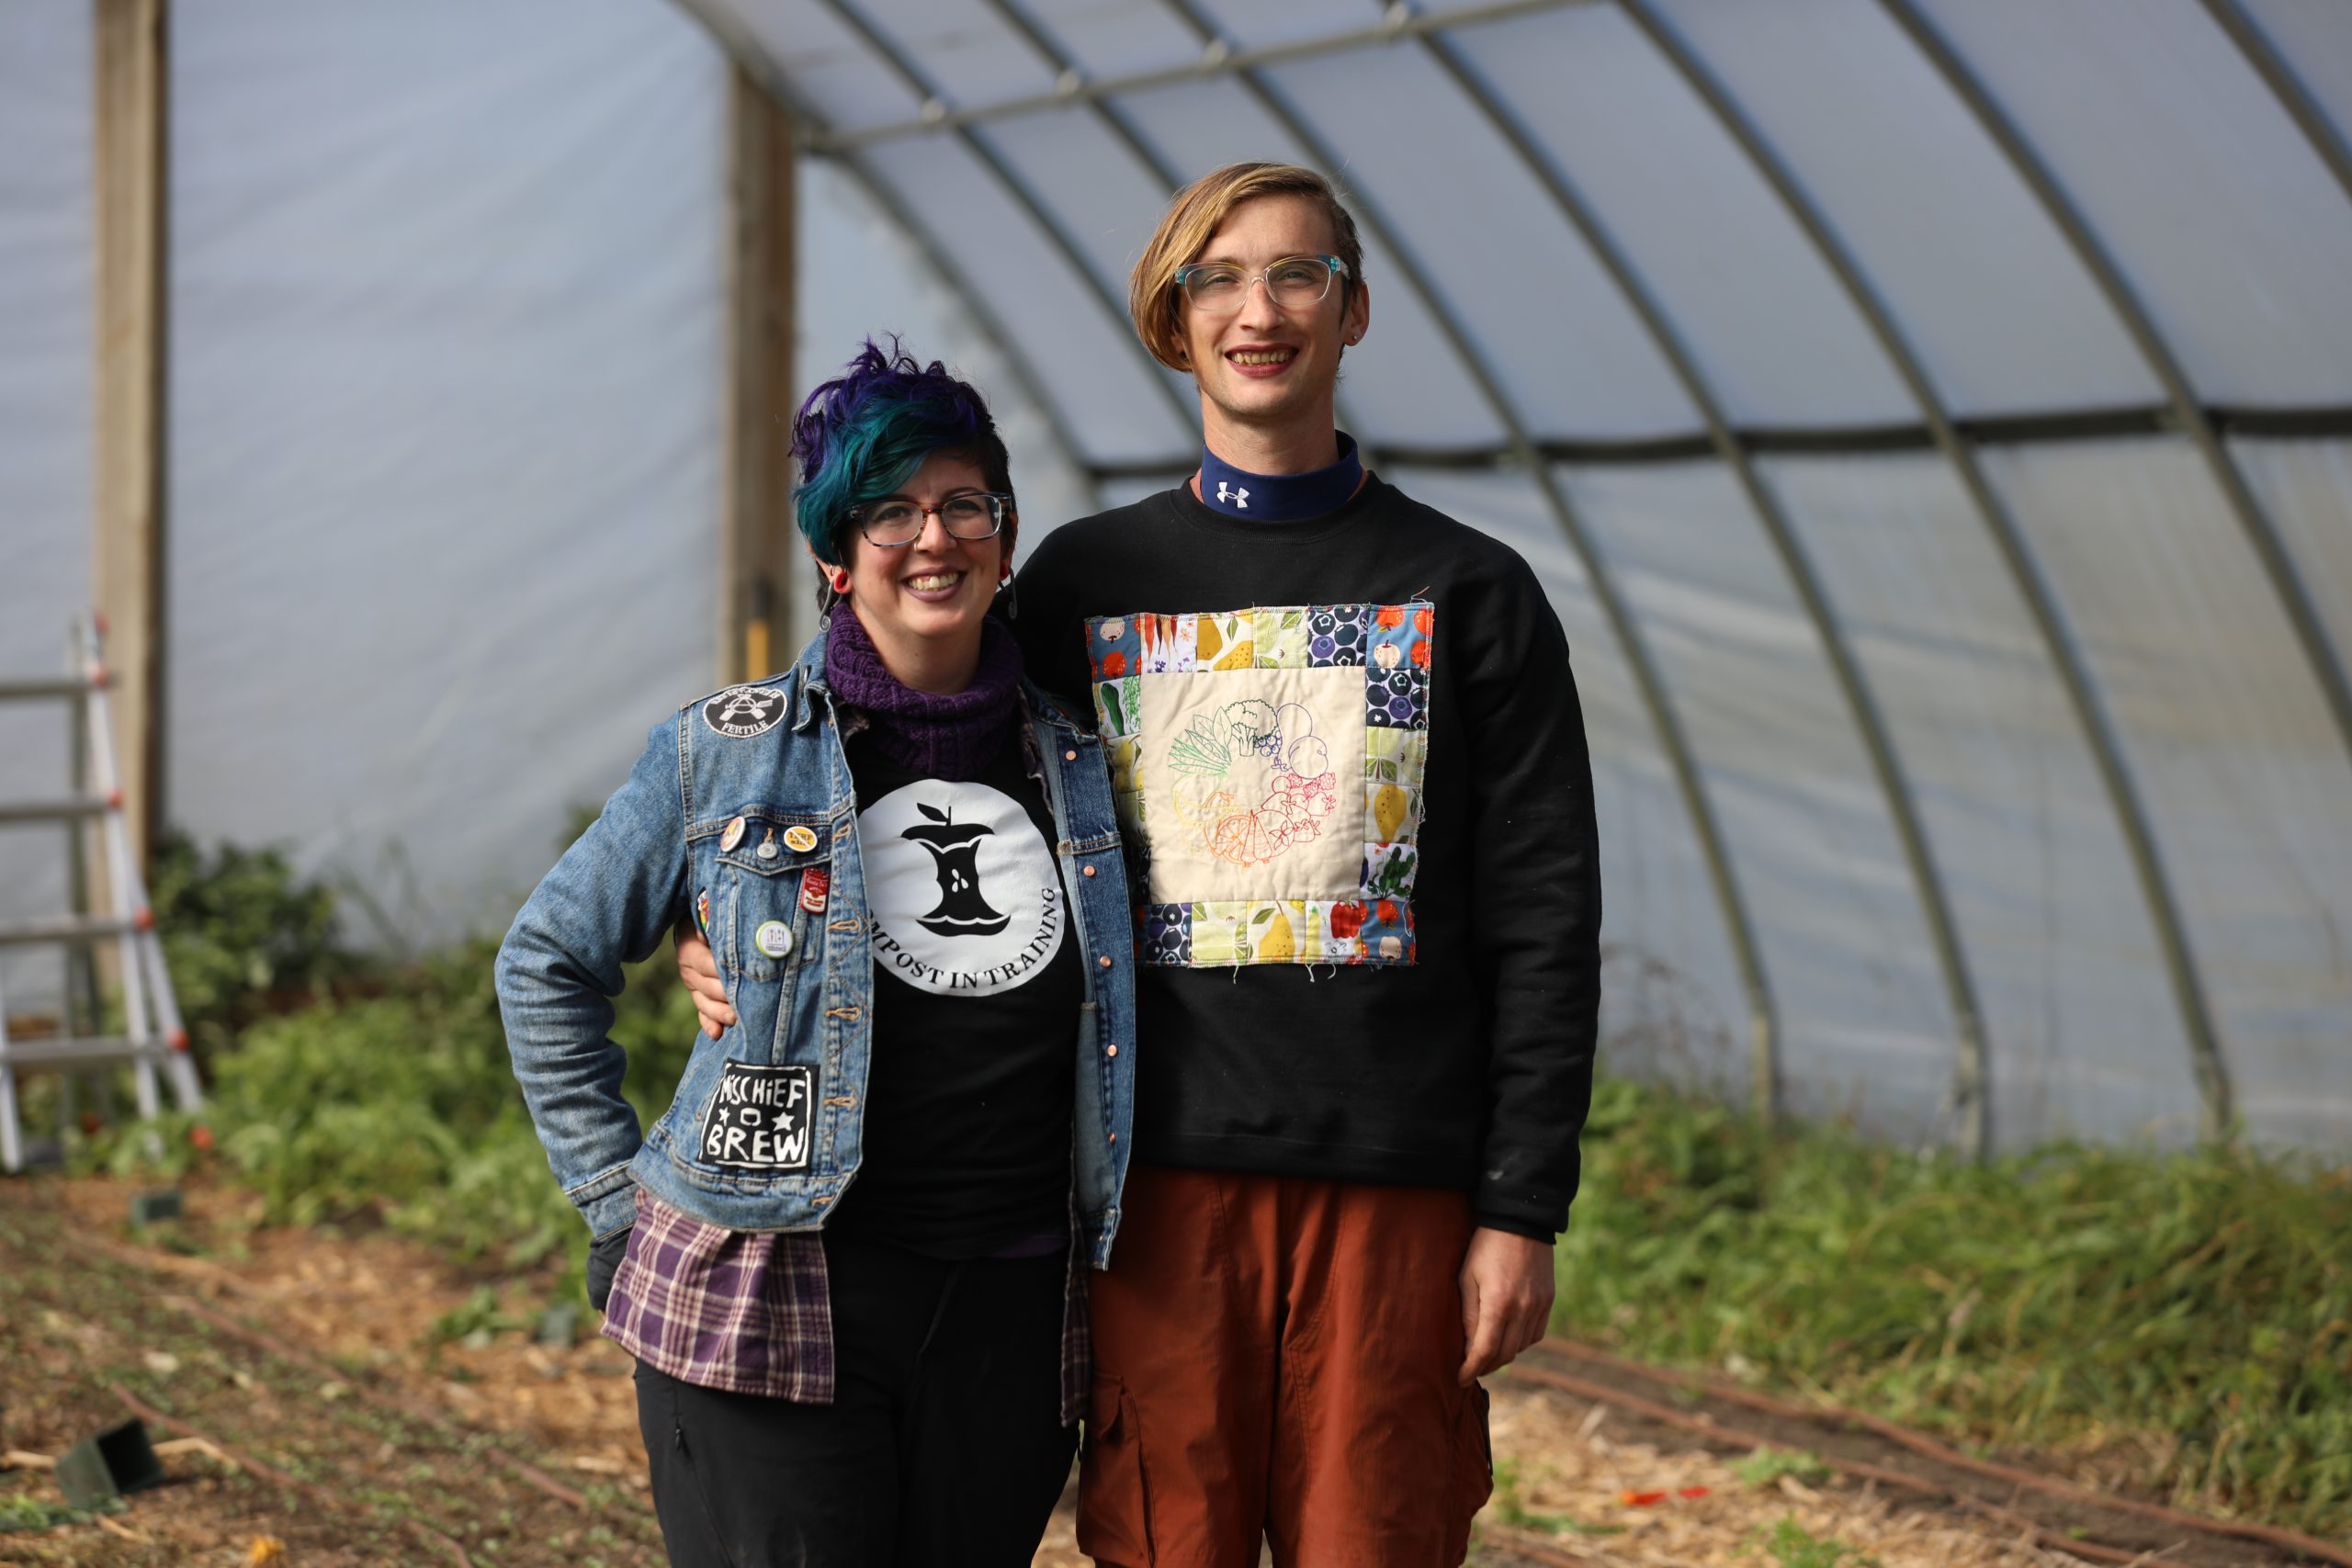 Queering the family farm Despite obstacles, LGBTQ farmers find fertile ground in Midwest image